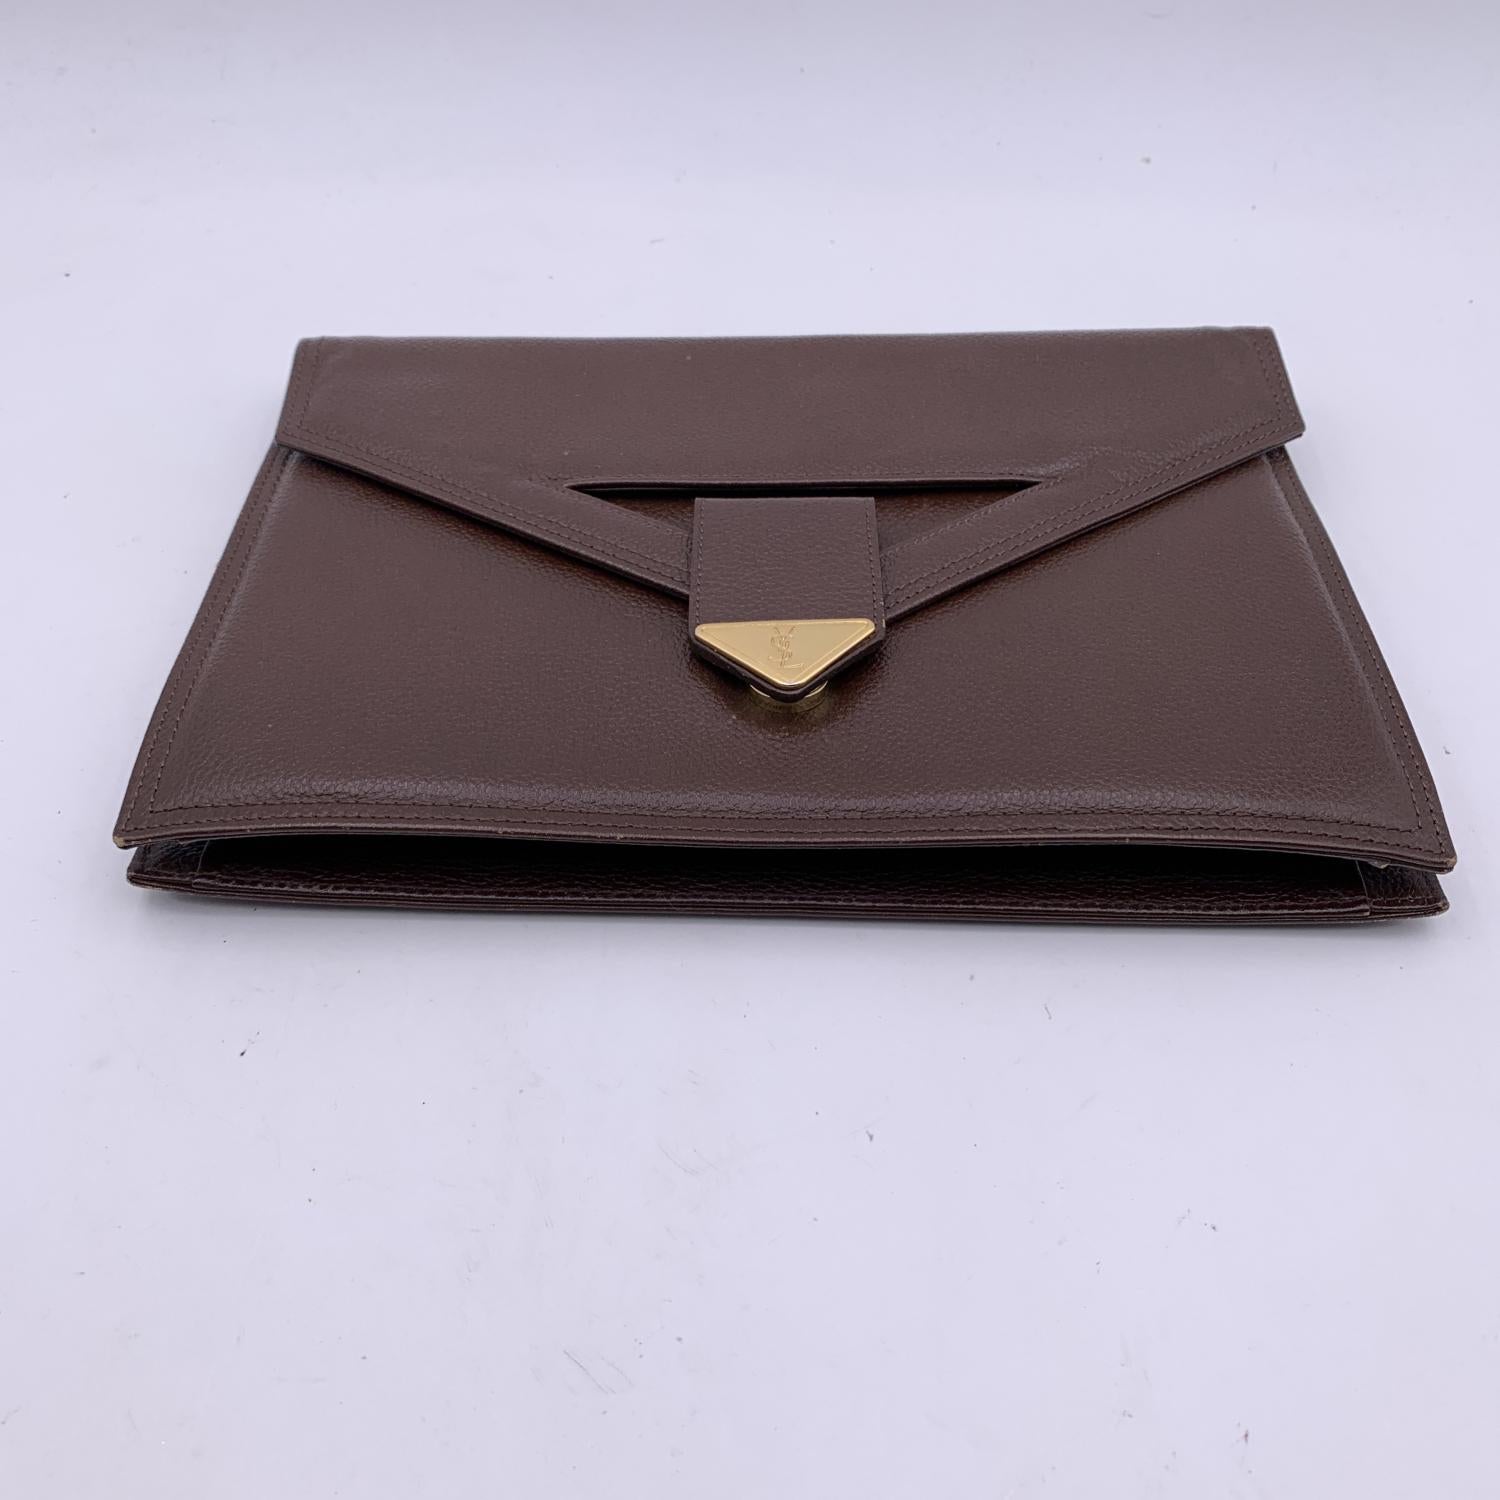 Yves Saint Laurent Vintage Brown Leather Clutch Bag Handbag In Excellent Condition In Rome, Rome